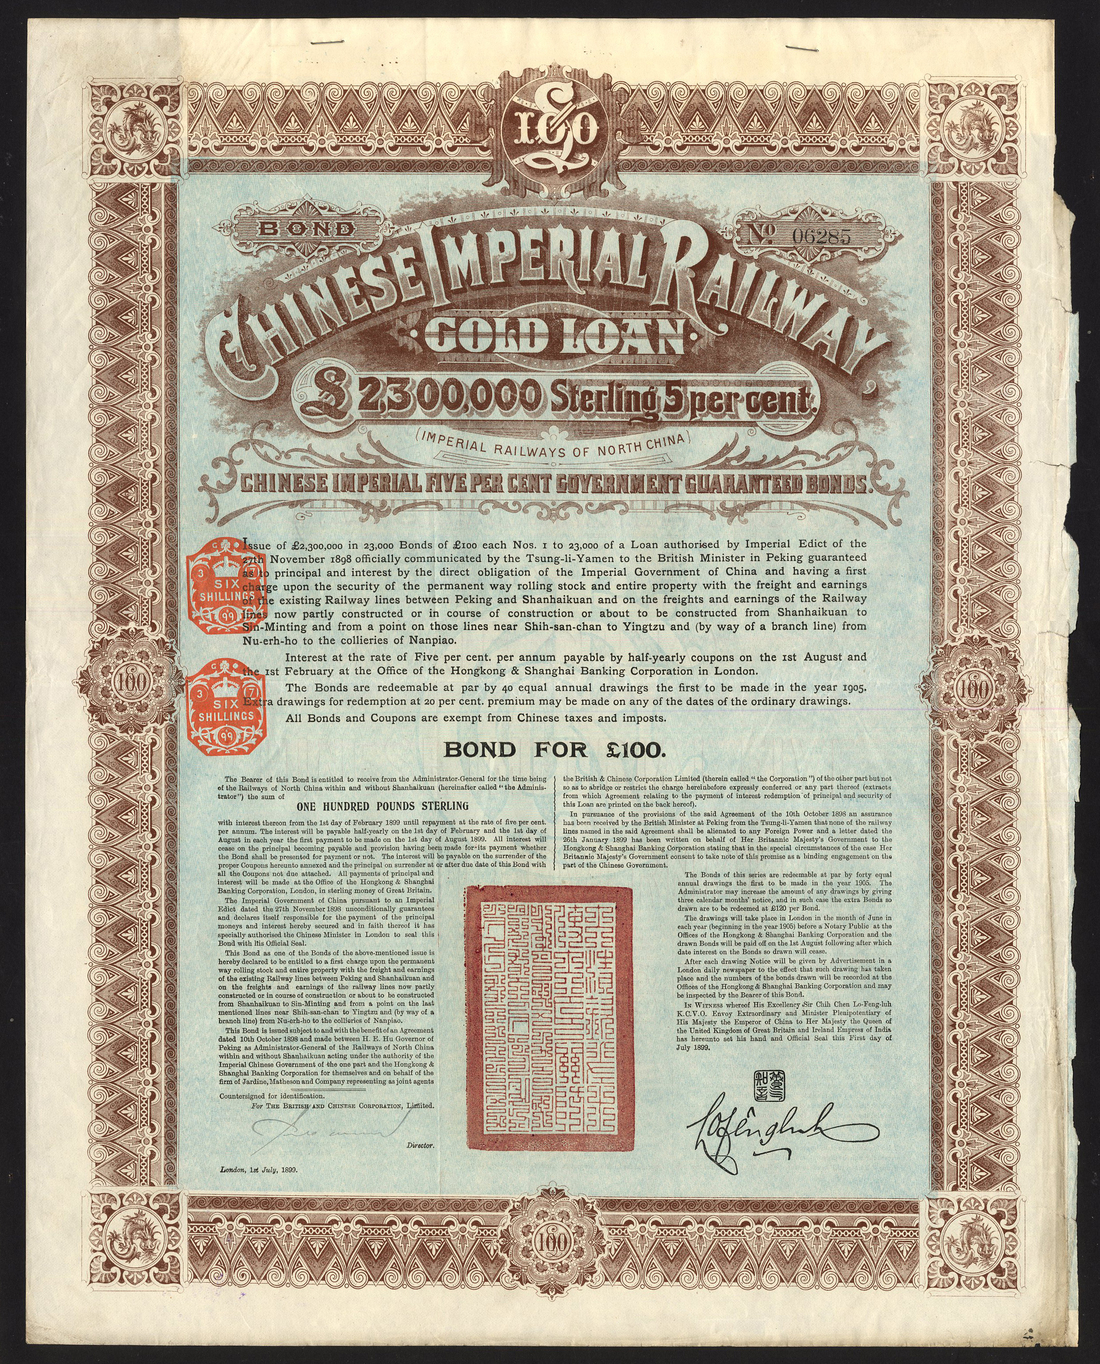 China: 1899, Chinese Imperial Railway, Railways of North China, 5% Gold Loan, £100 bond, no.06285,